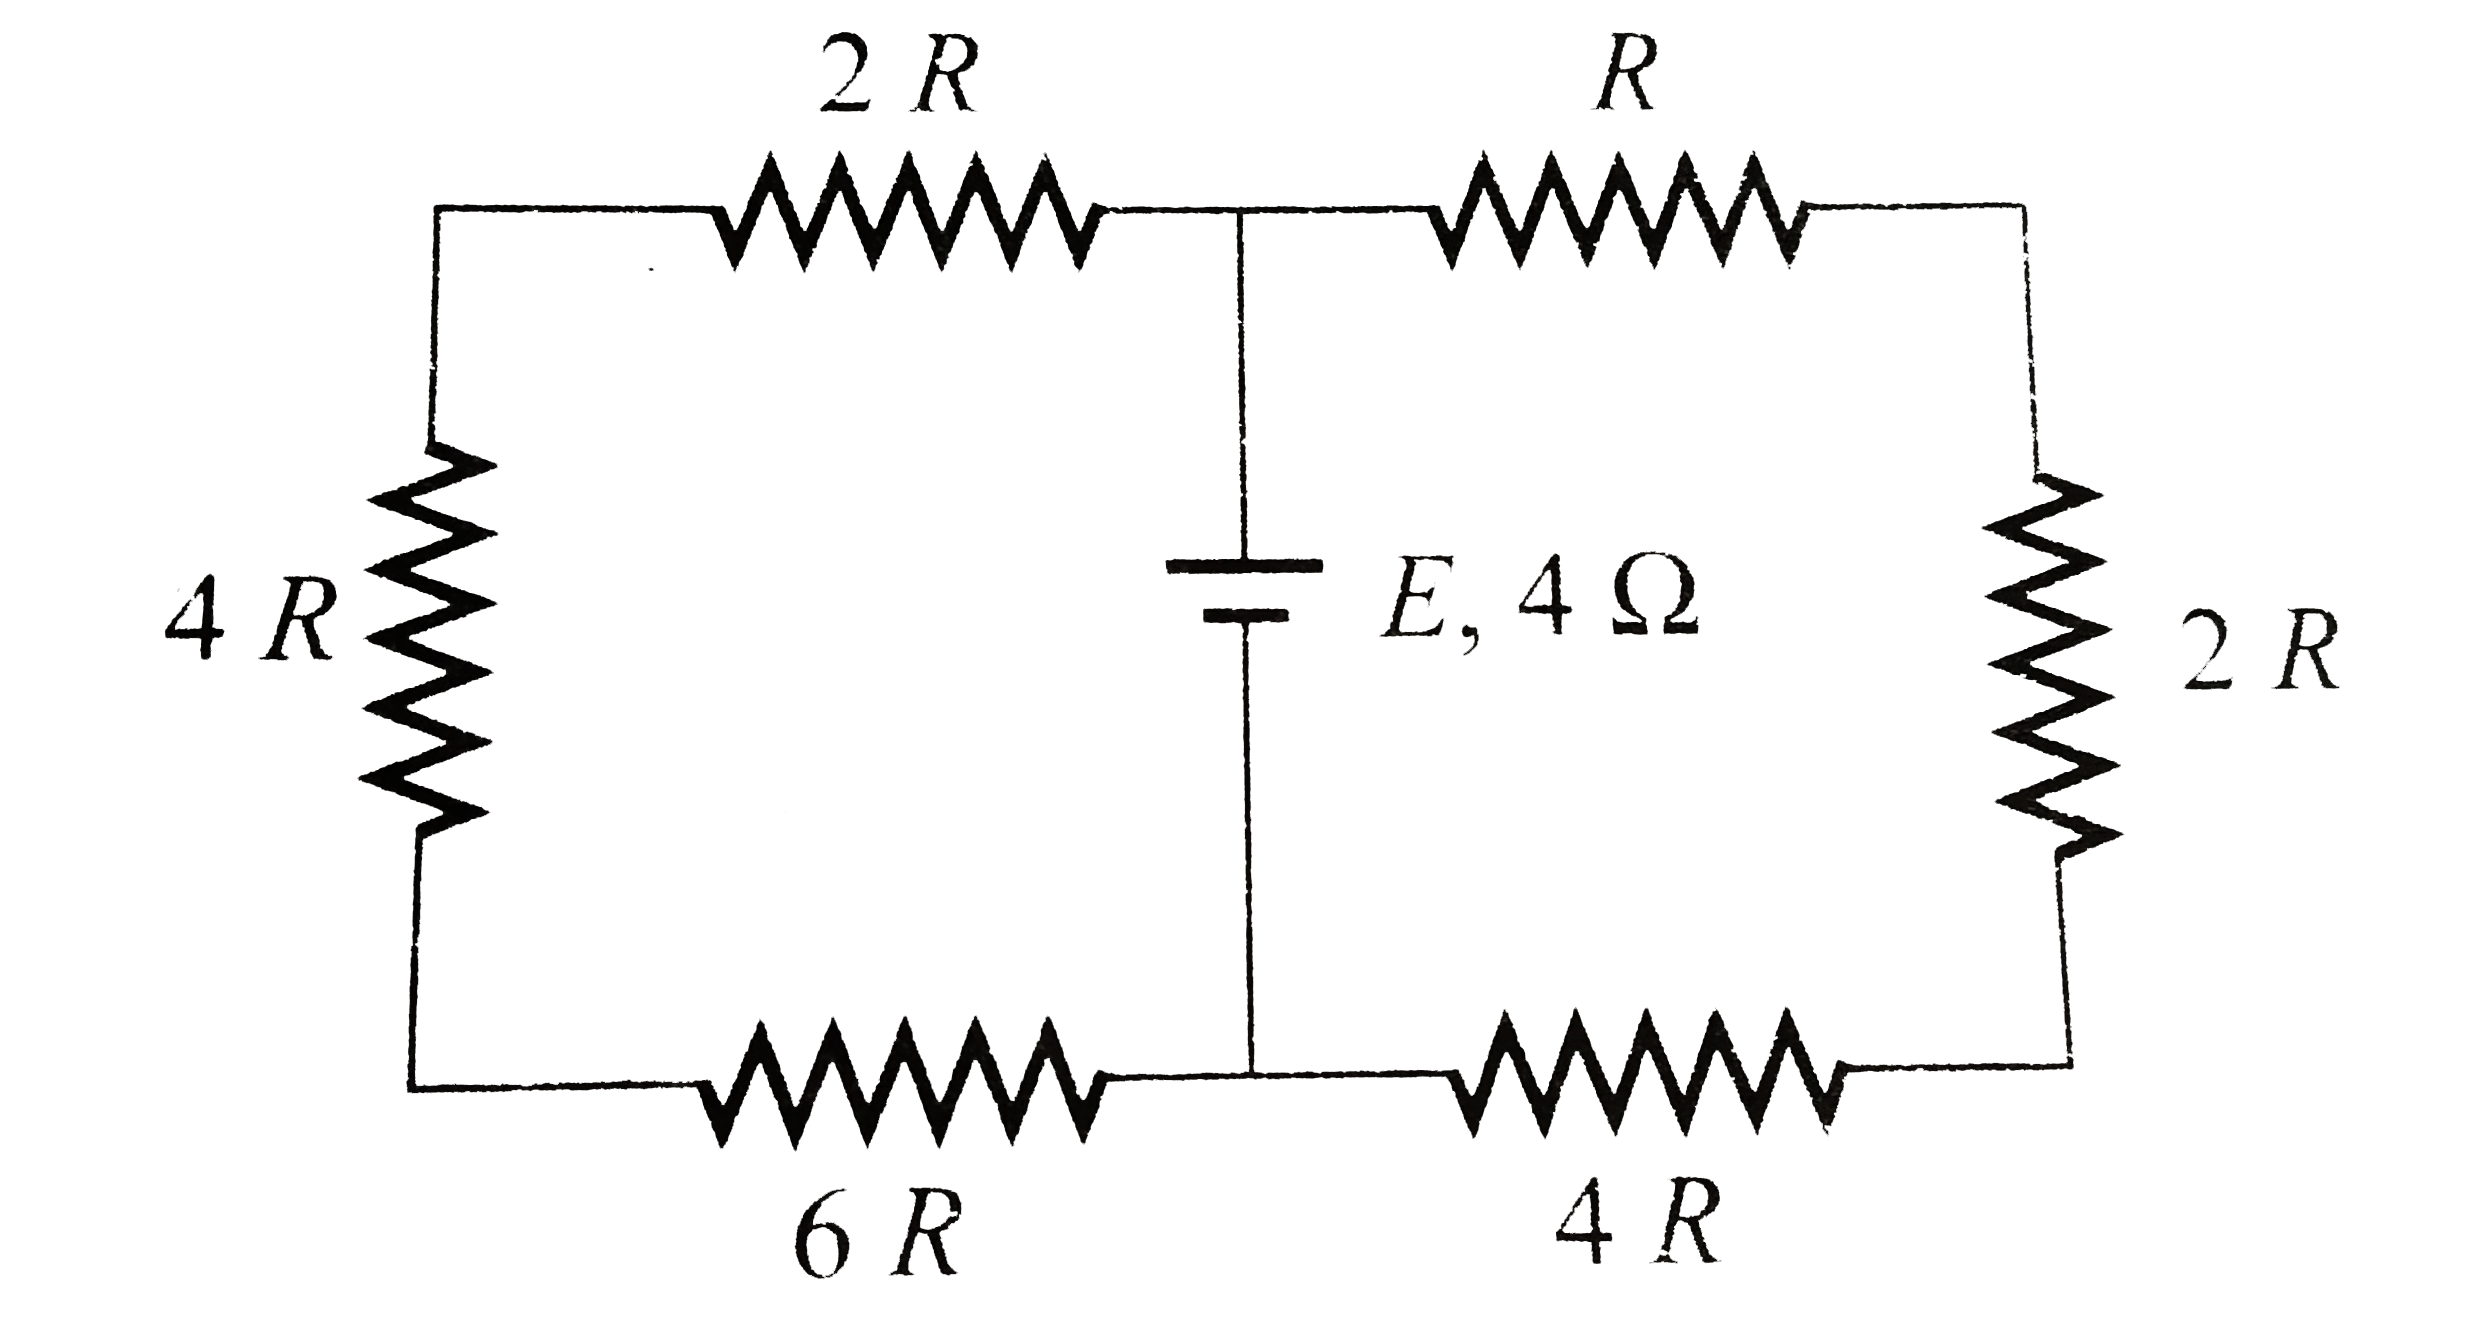 A battery of internal resistance 4Omega is connected to the network of the resistance as shown in figure . If the maximum power can be delivered to the network, the magnitude of resistance in Omegashould be